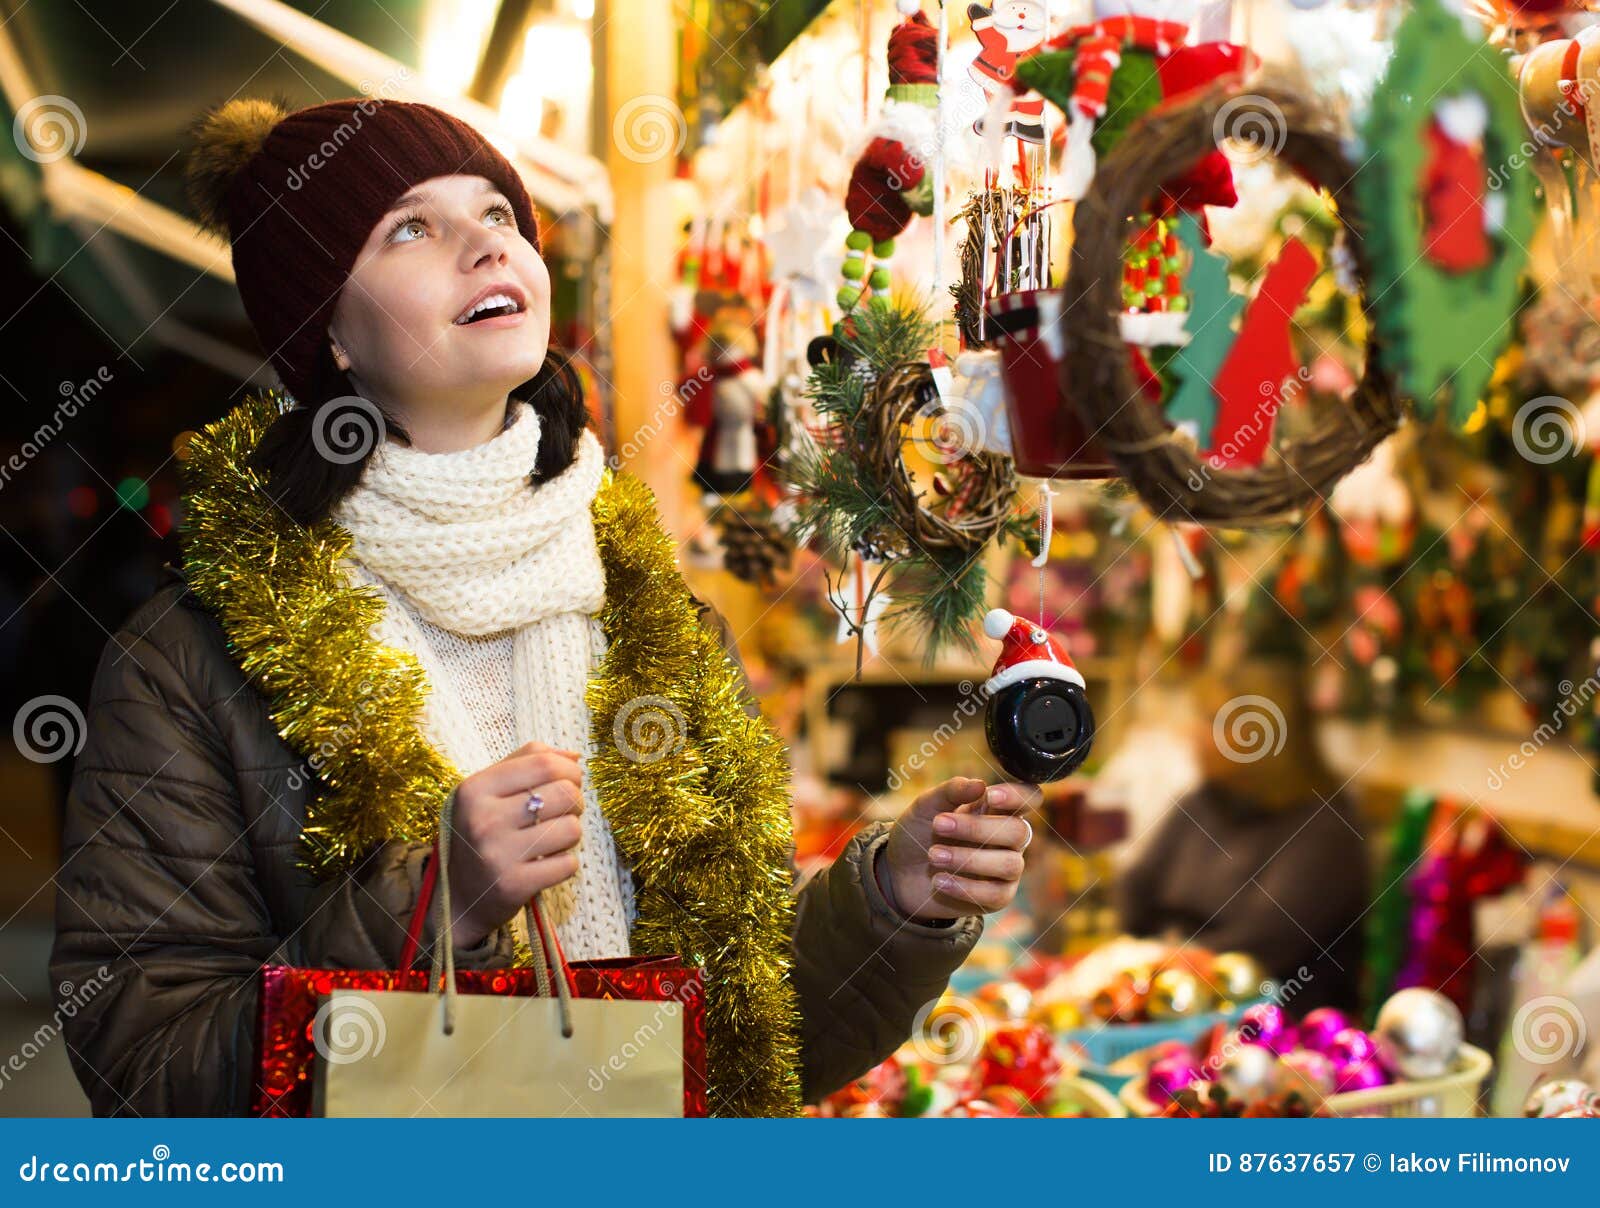 Young Female Teen Customer with Christmas Gifts Stock Image - Image of ...